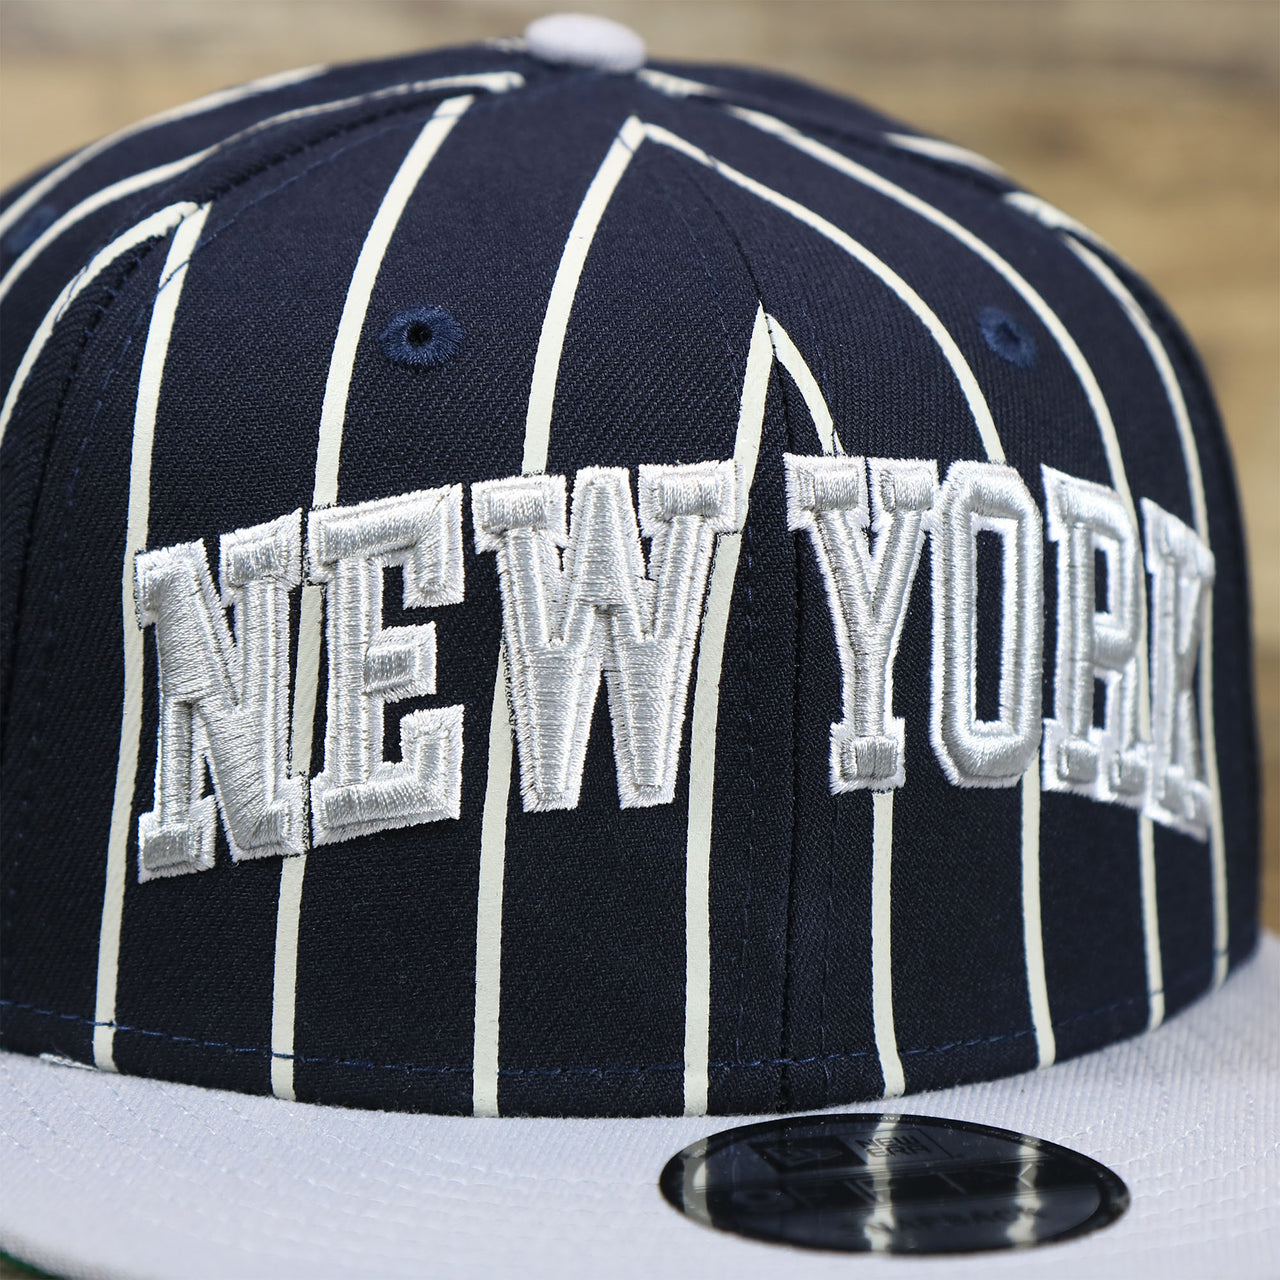 The New York Wordmark on the New York Yankees City Arch Striped 9Fifty Snapback Cap | Pin Stripe 9Fifty Cap